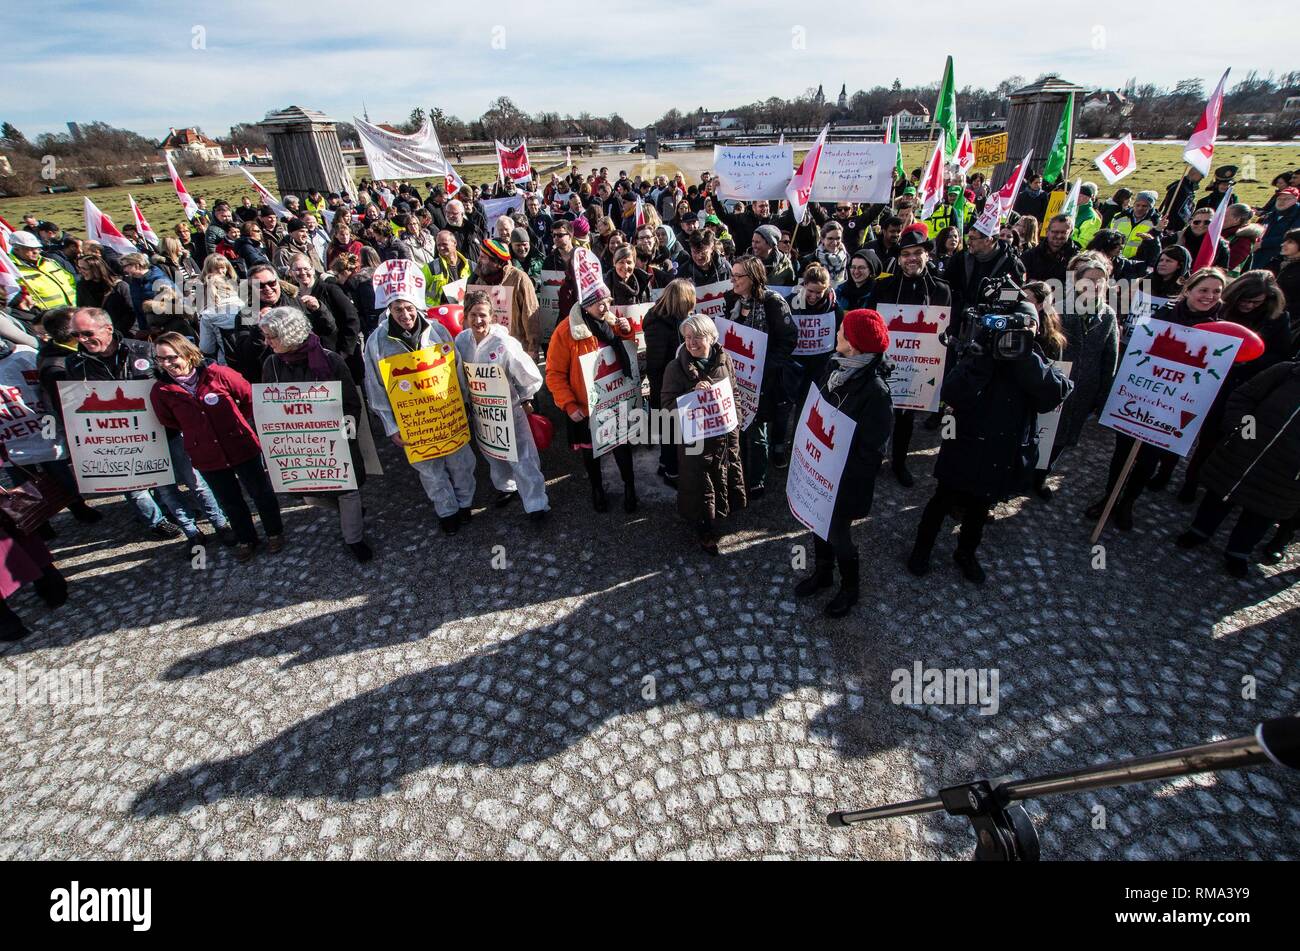 February 14, 2019 - Munich, Bavaria, Germany - To signify the failure of the second round of talks with employers, the German Verdi Ver.di labor union organized a 200+ strong flashmob action at the famed Schloss Nymphenburg in Munich to kick off a new strike wave.  The Union chose Castle Nymphenburg due to the pride and money Bavarian Ministerpresident Markus Soeder has invested into the castles of Bavaria, which in return have become major tourist attractions and income sources.  The union states that some of the money should be invested in the workers that that help keep these sites in opera Stock Photo